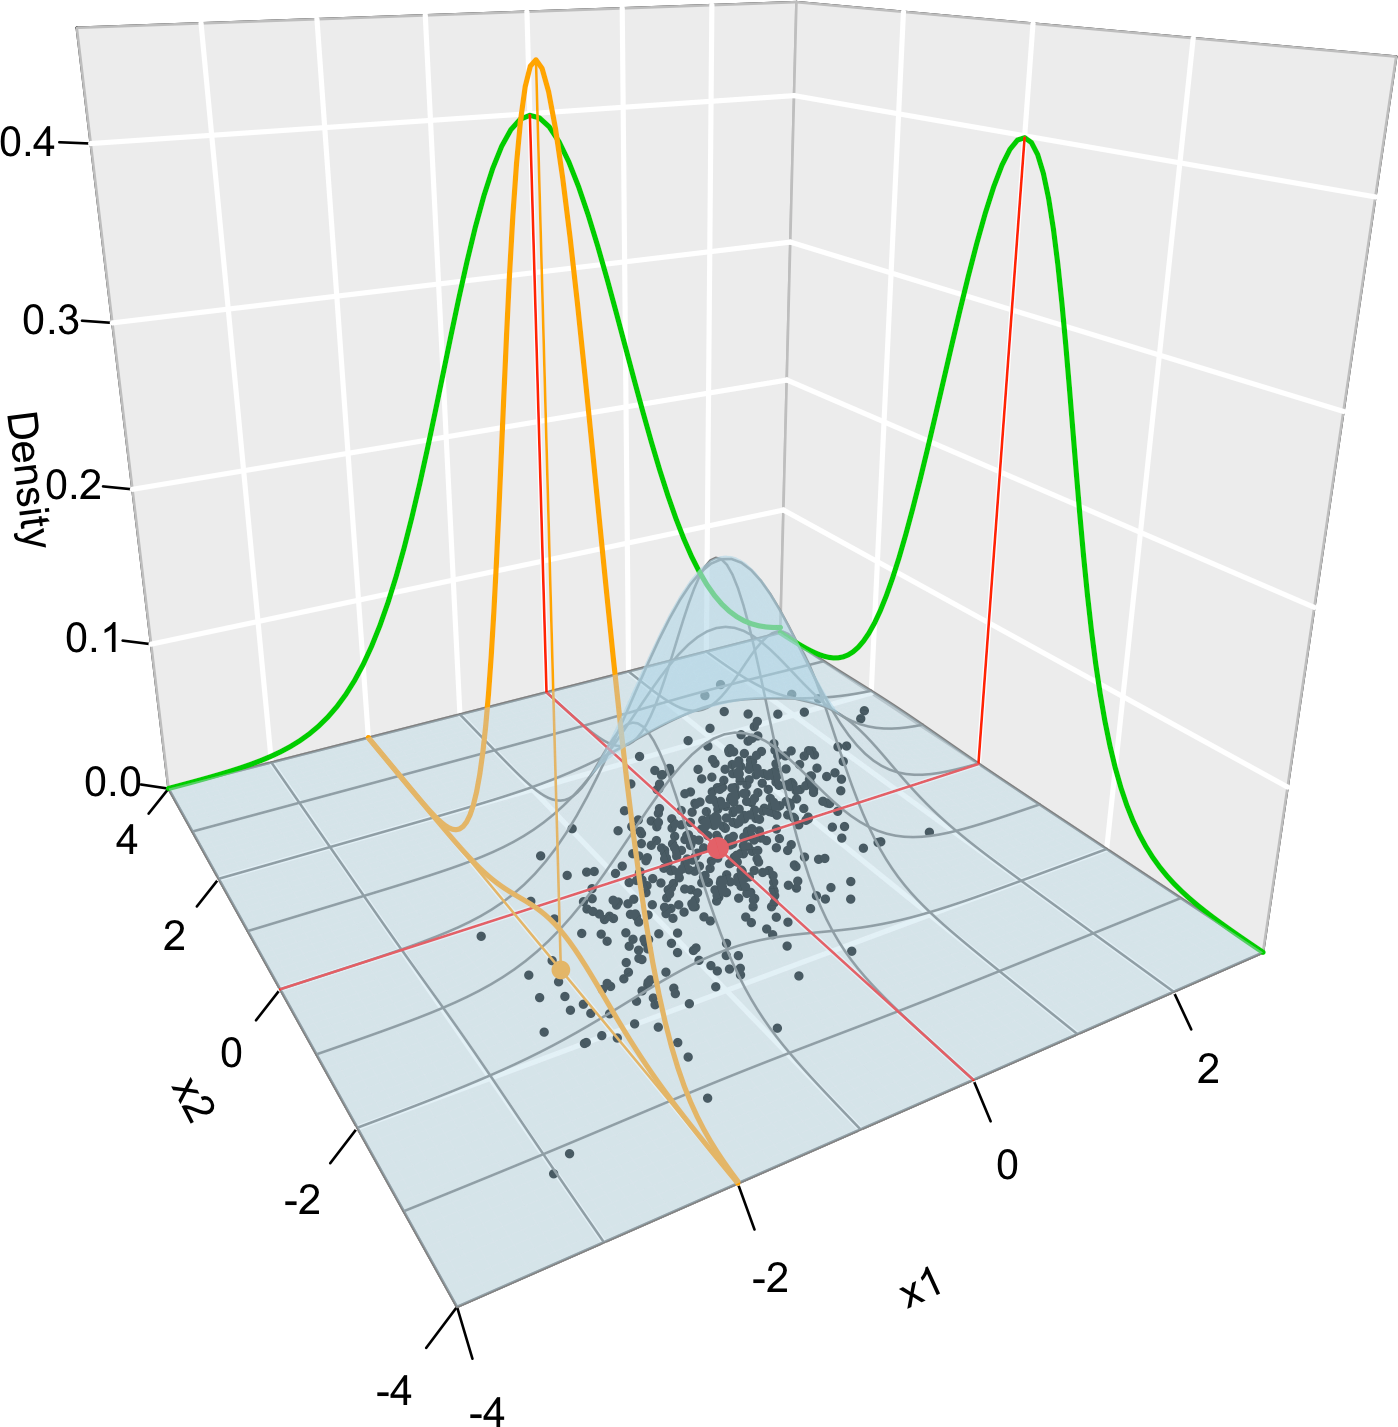 Visualization of the joint pdf (in blue), marginal pdfs (green), conditional pdf of \(X_2| X_1=x_1\) (orange), expectation (red point), and conditional expectation \(\mathbb{E}\lbrack X_2 | X_1=x_1 \rbrack\) (orange point) of a \(2\)-dimensional normal. The conditioning point of \(X_1\) is \(x_1=-2.\) Note the different scales of the densities, as they have to integrate one over different supports. Note how the conditional density (upper orange curve) is not the joint pdf \(f(x_1,x_2)\) (lower orange curve) with \(x_1=-2\) but a rescaling of this curve by \(\frac{1}{f_{X_1}(x_1)}.\) The parameters of the \(2\)-dimensional normal are \(\mu_1=\mu_2=0,\) \(\sigma_1=\sigma_2=1\) and \(\rho=0.75.\) \(500\) observations sampled from the distribution are shown as black points.